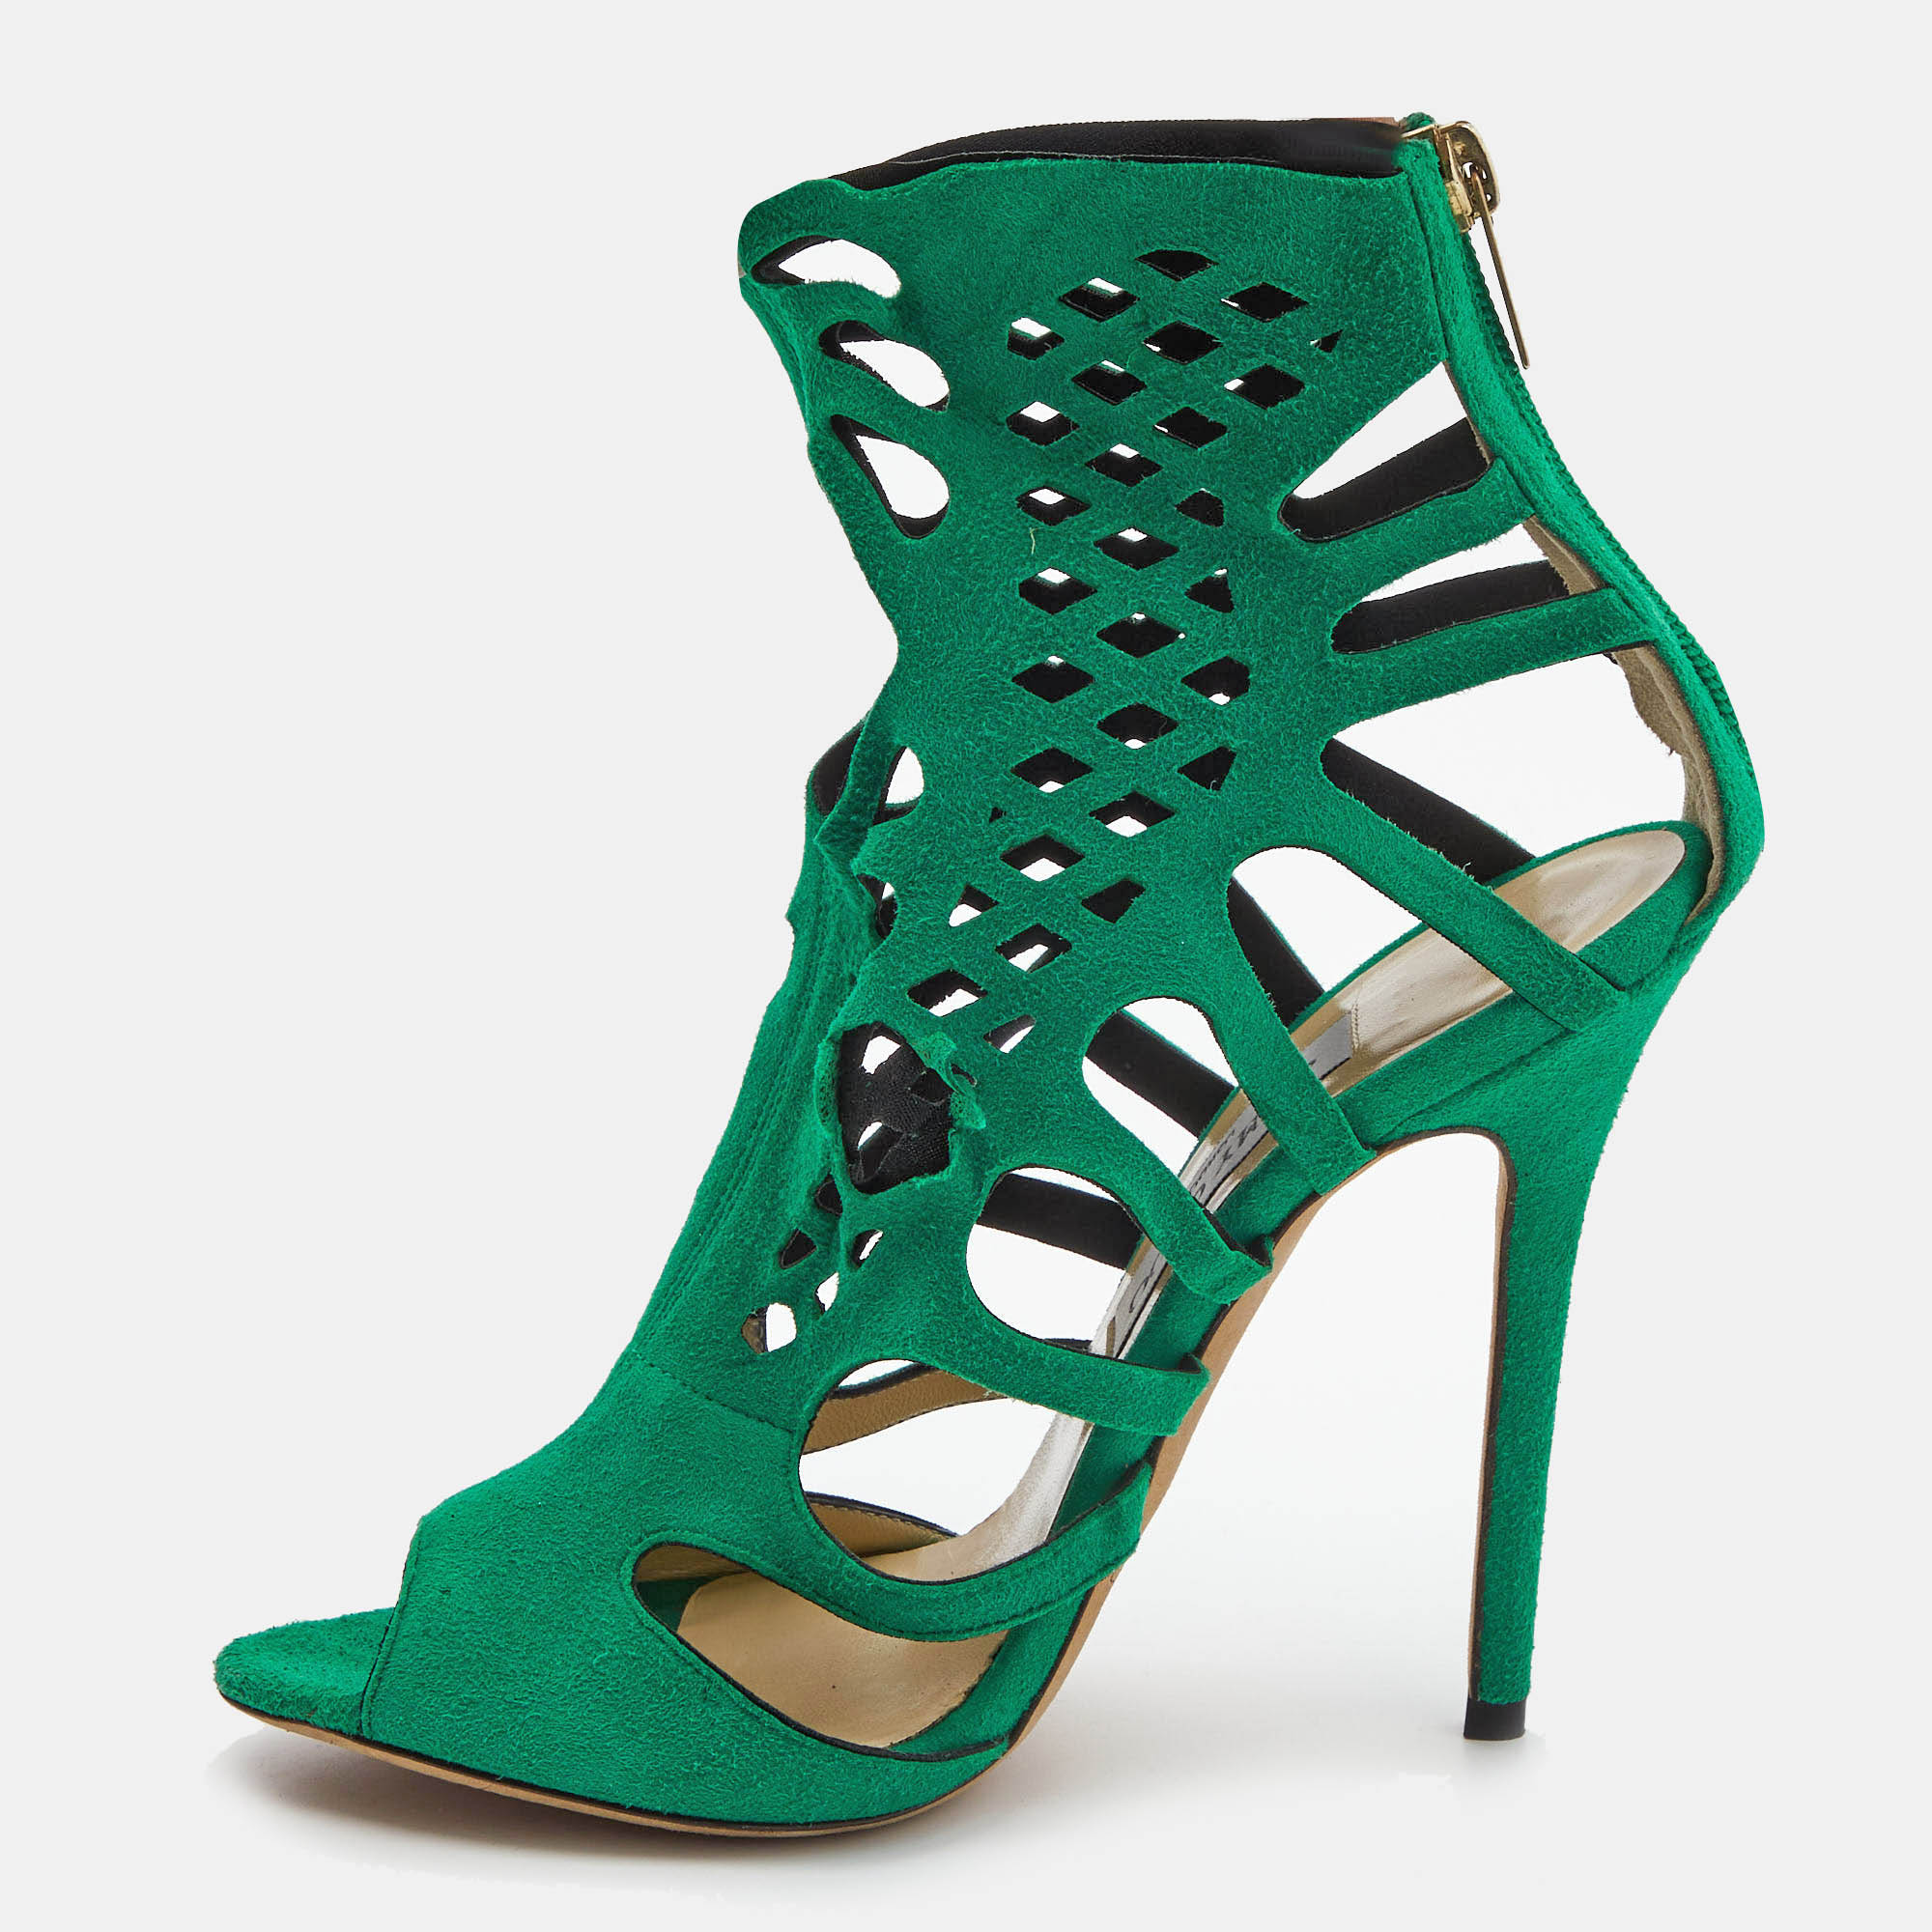 Jimmy Choo Green Suede Cut Out Sandals Size 38.5